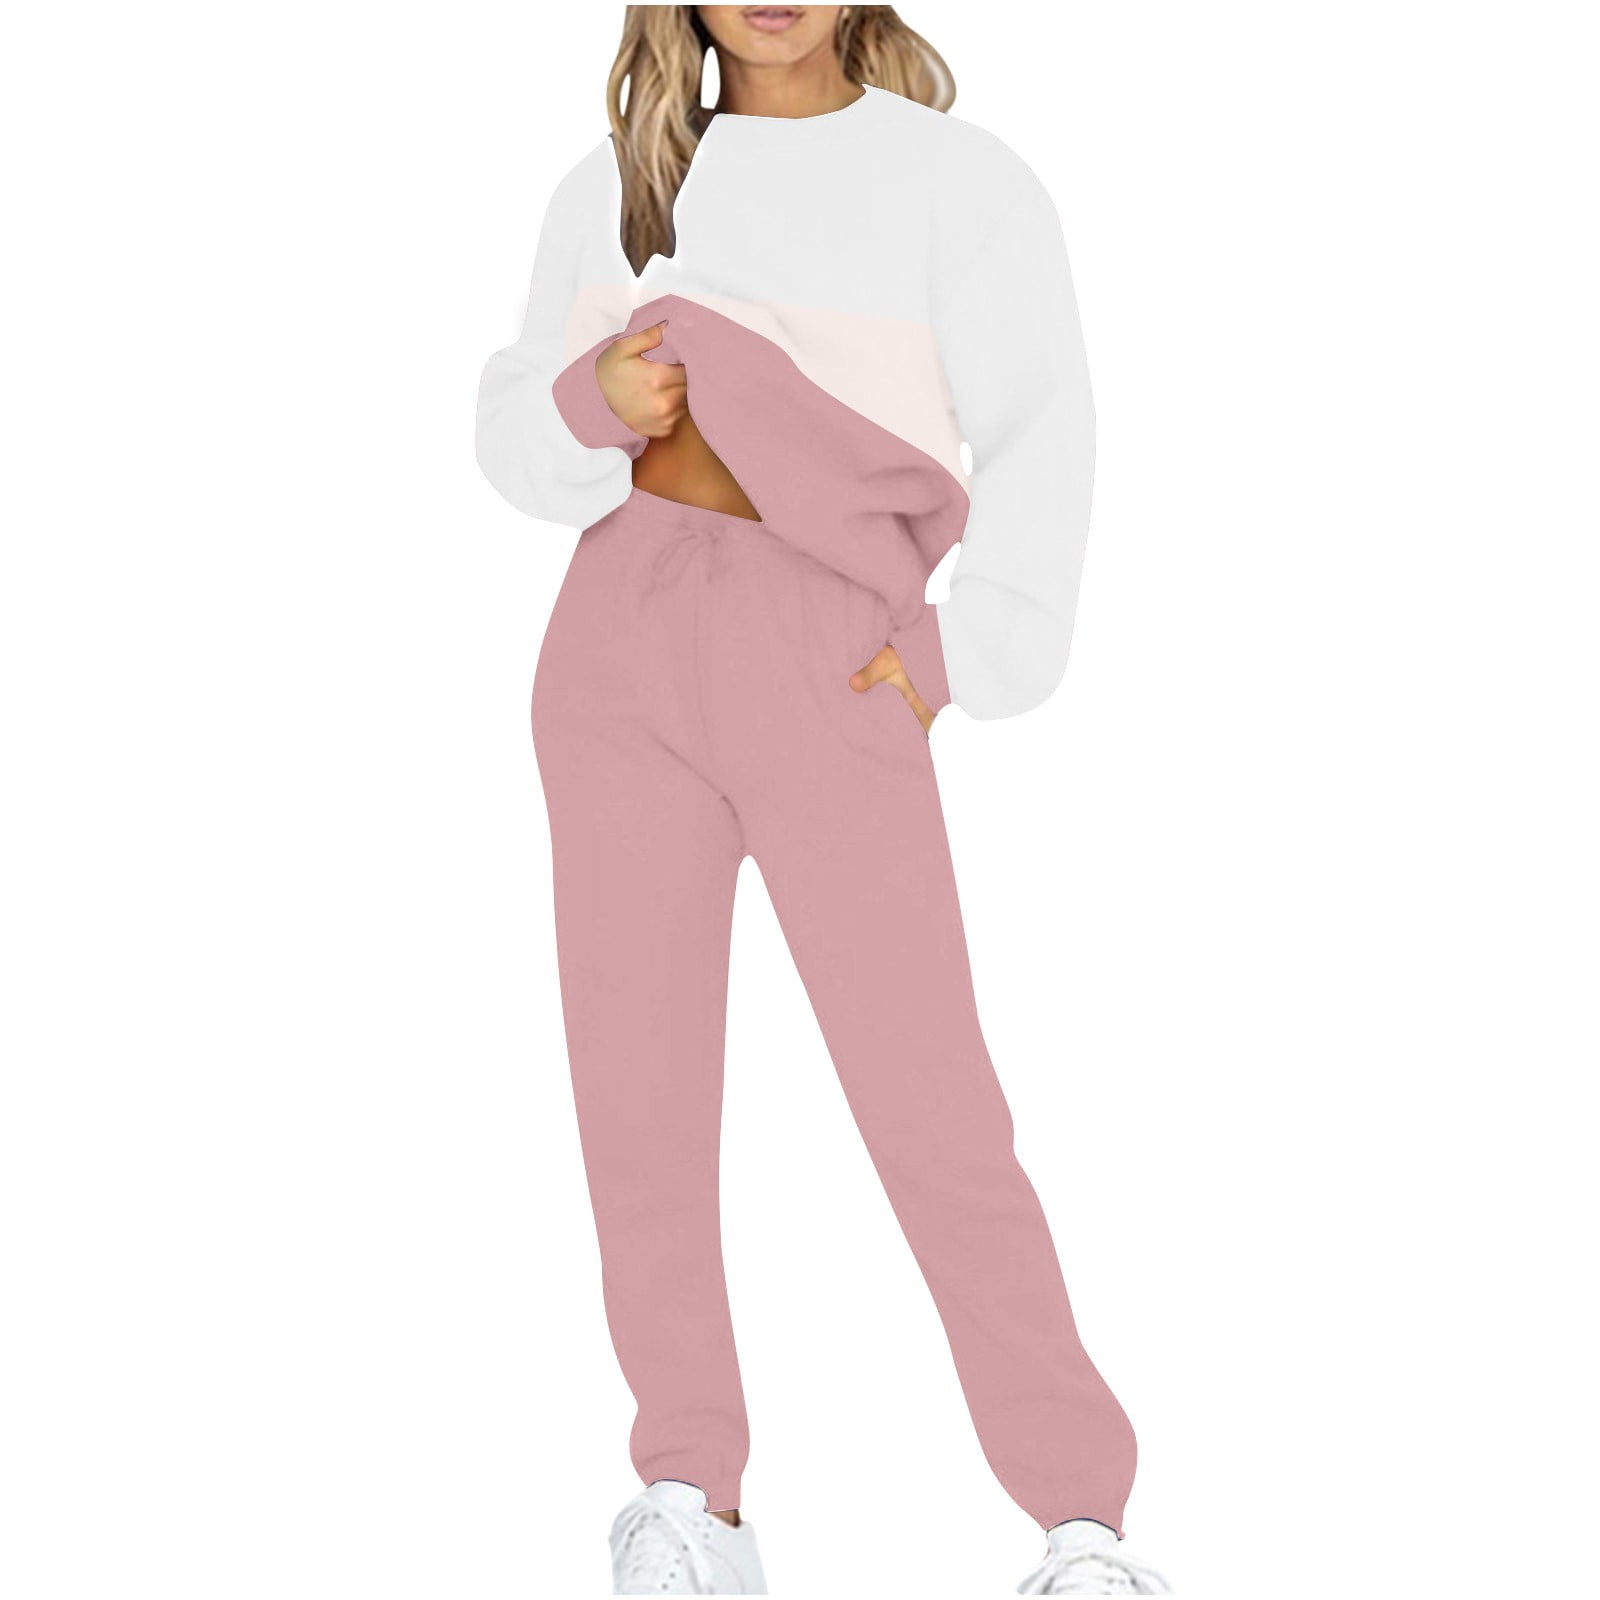 TIHLMK Track Suits for Women Set Sales Clearance Women Tracksuit ...